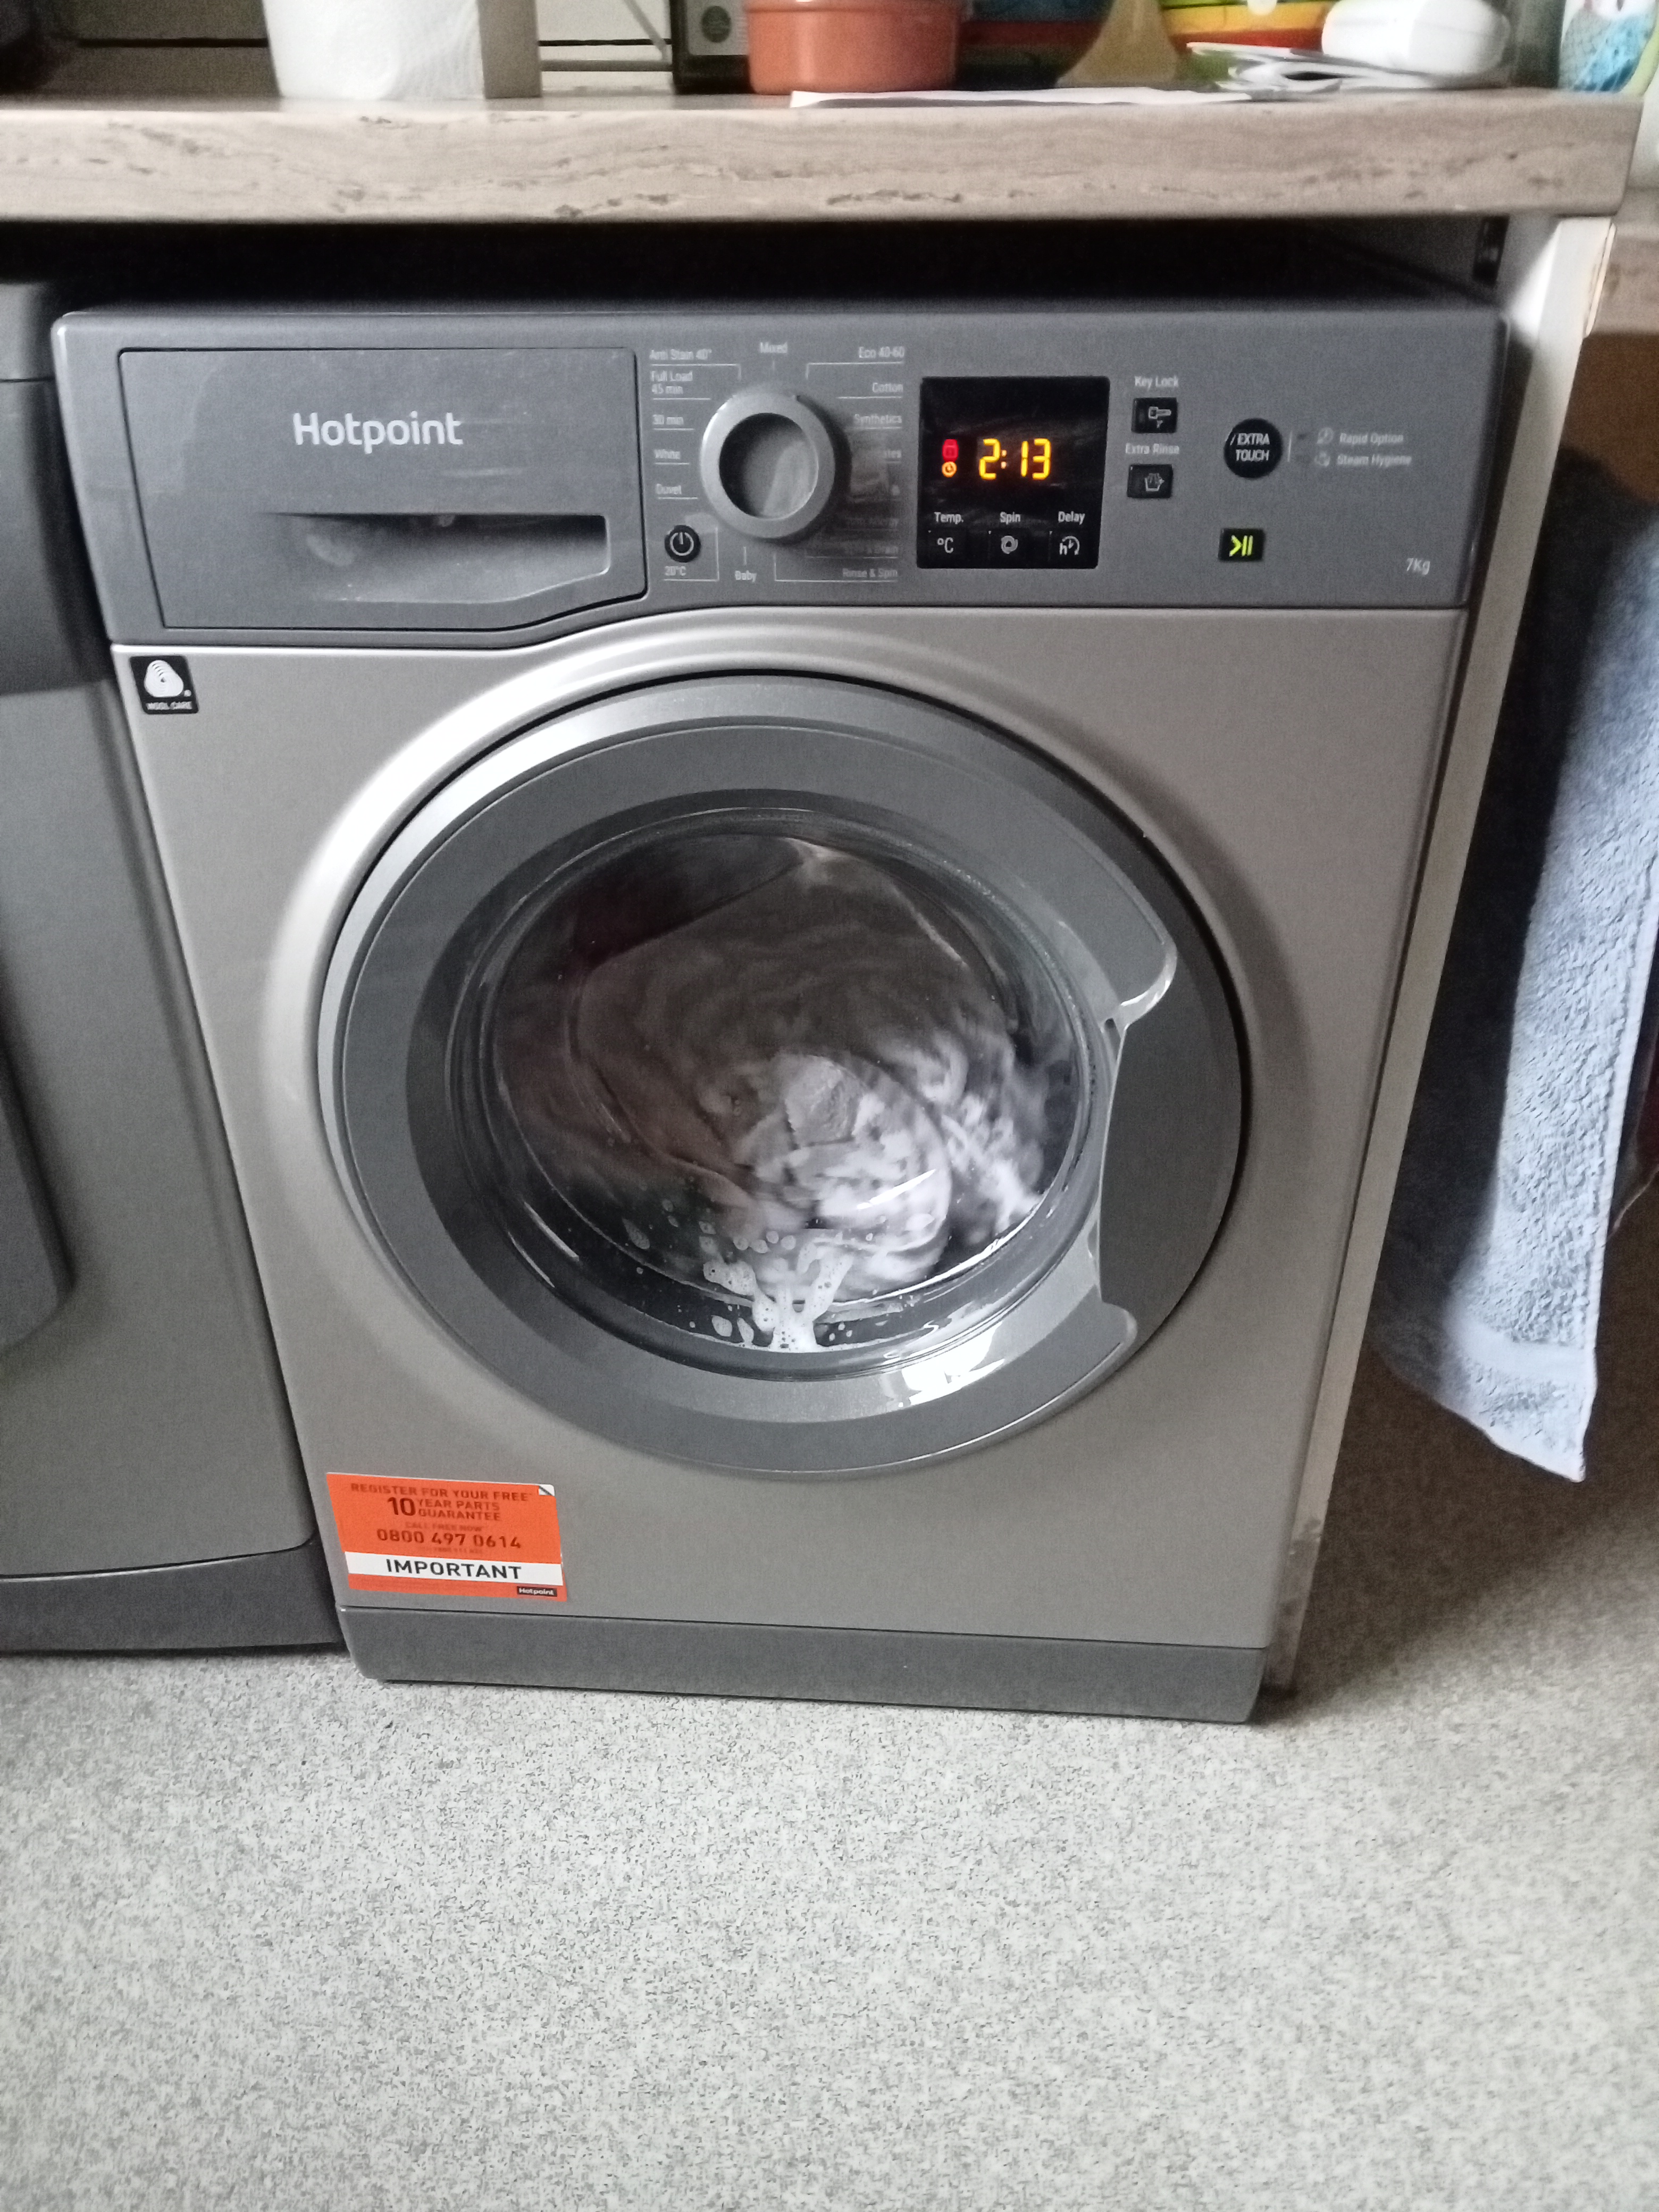 The Machine is very limited. It only offers a 40o wash on the Eco 40-60.
The length of time on the ...